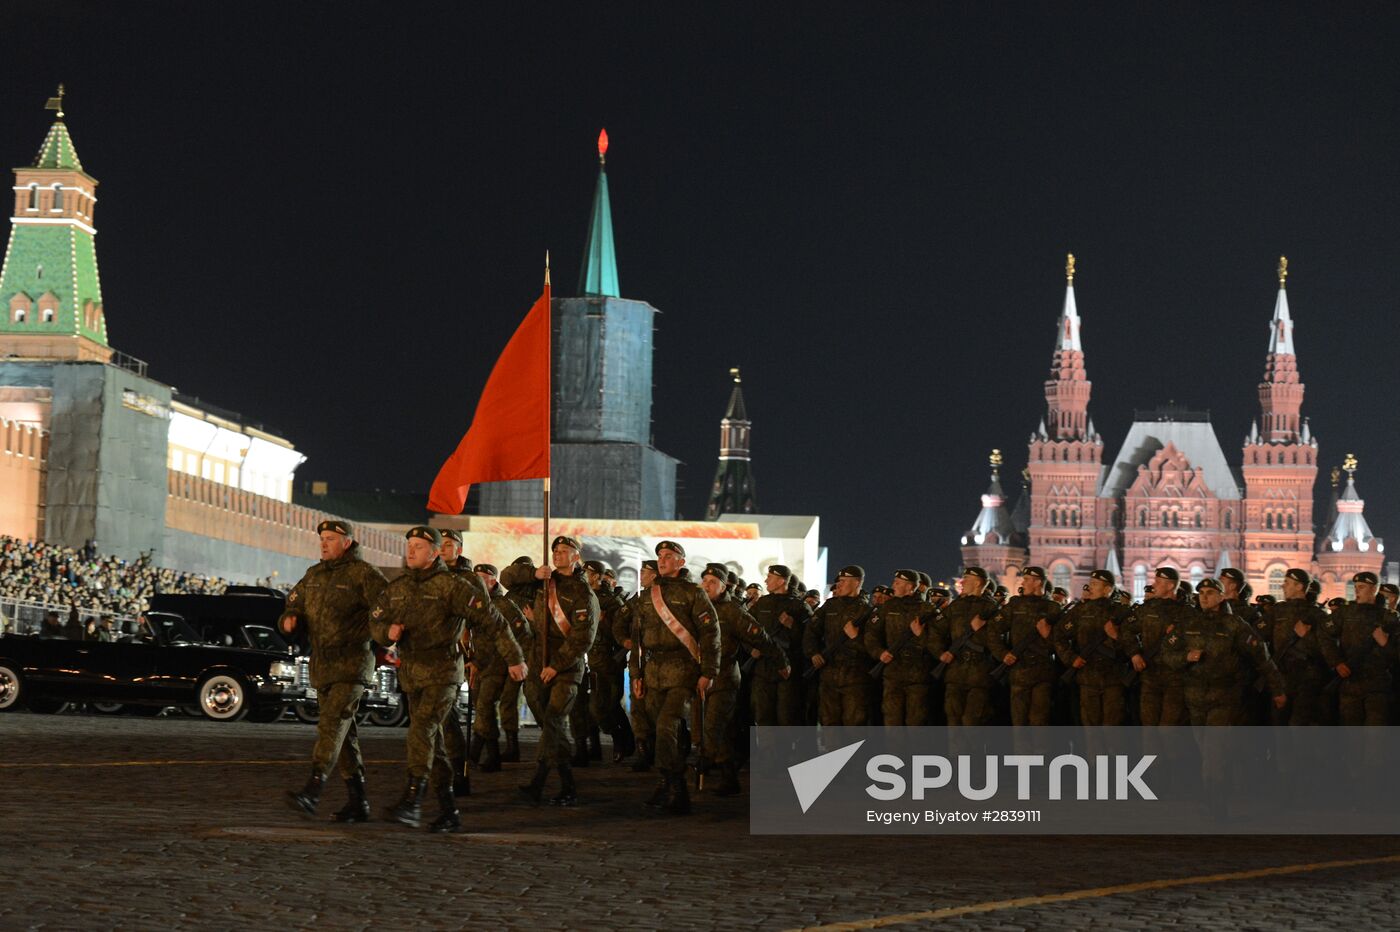 Nighttime military parade practice on Red Square